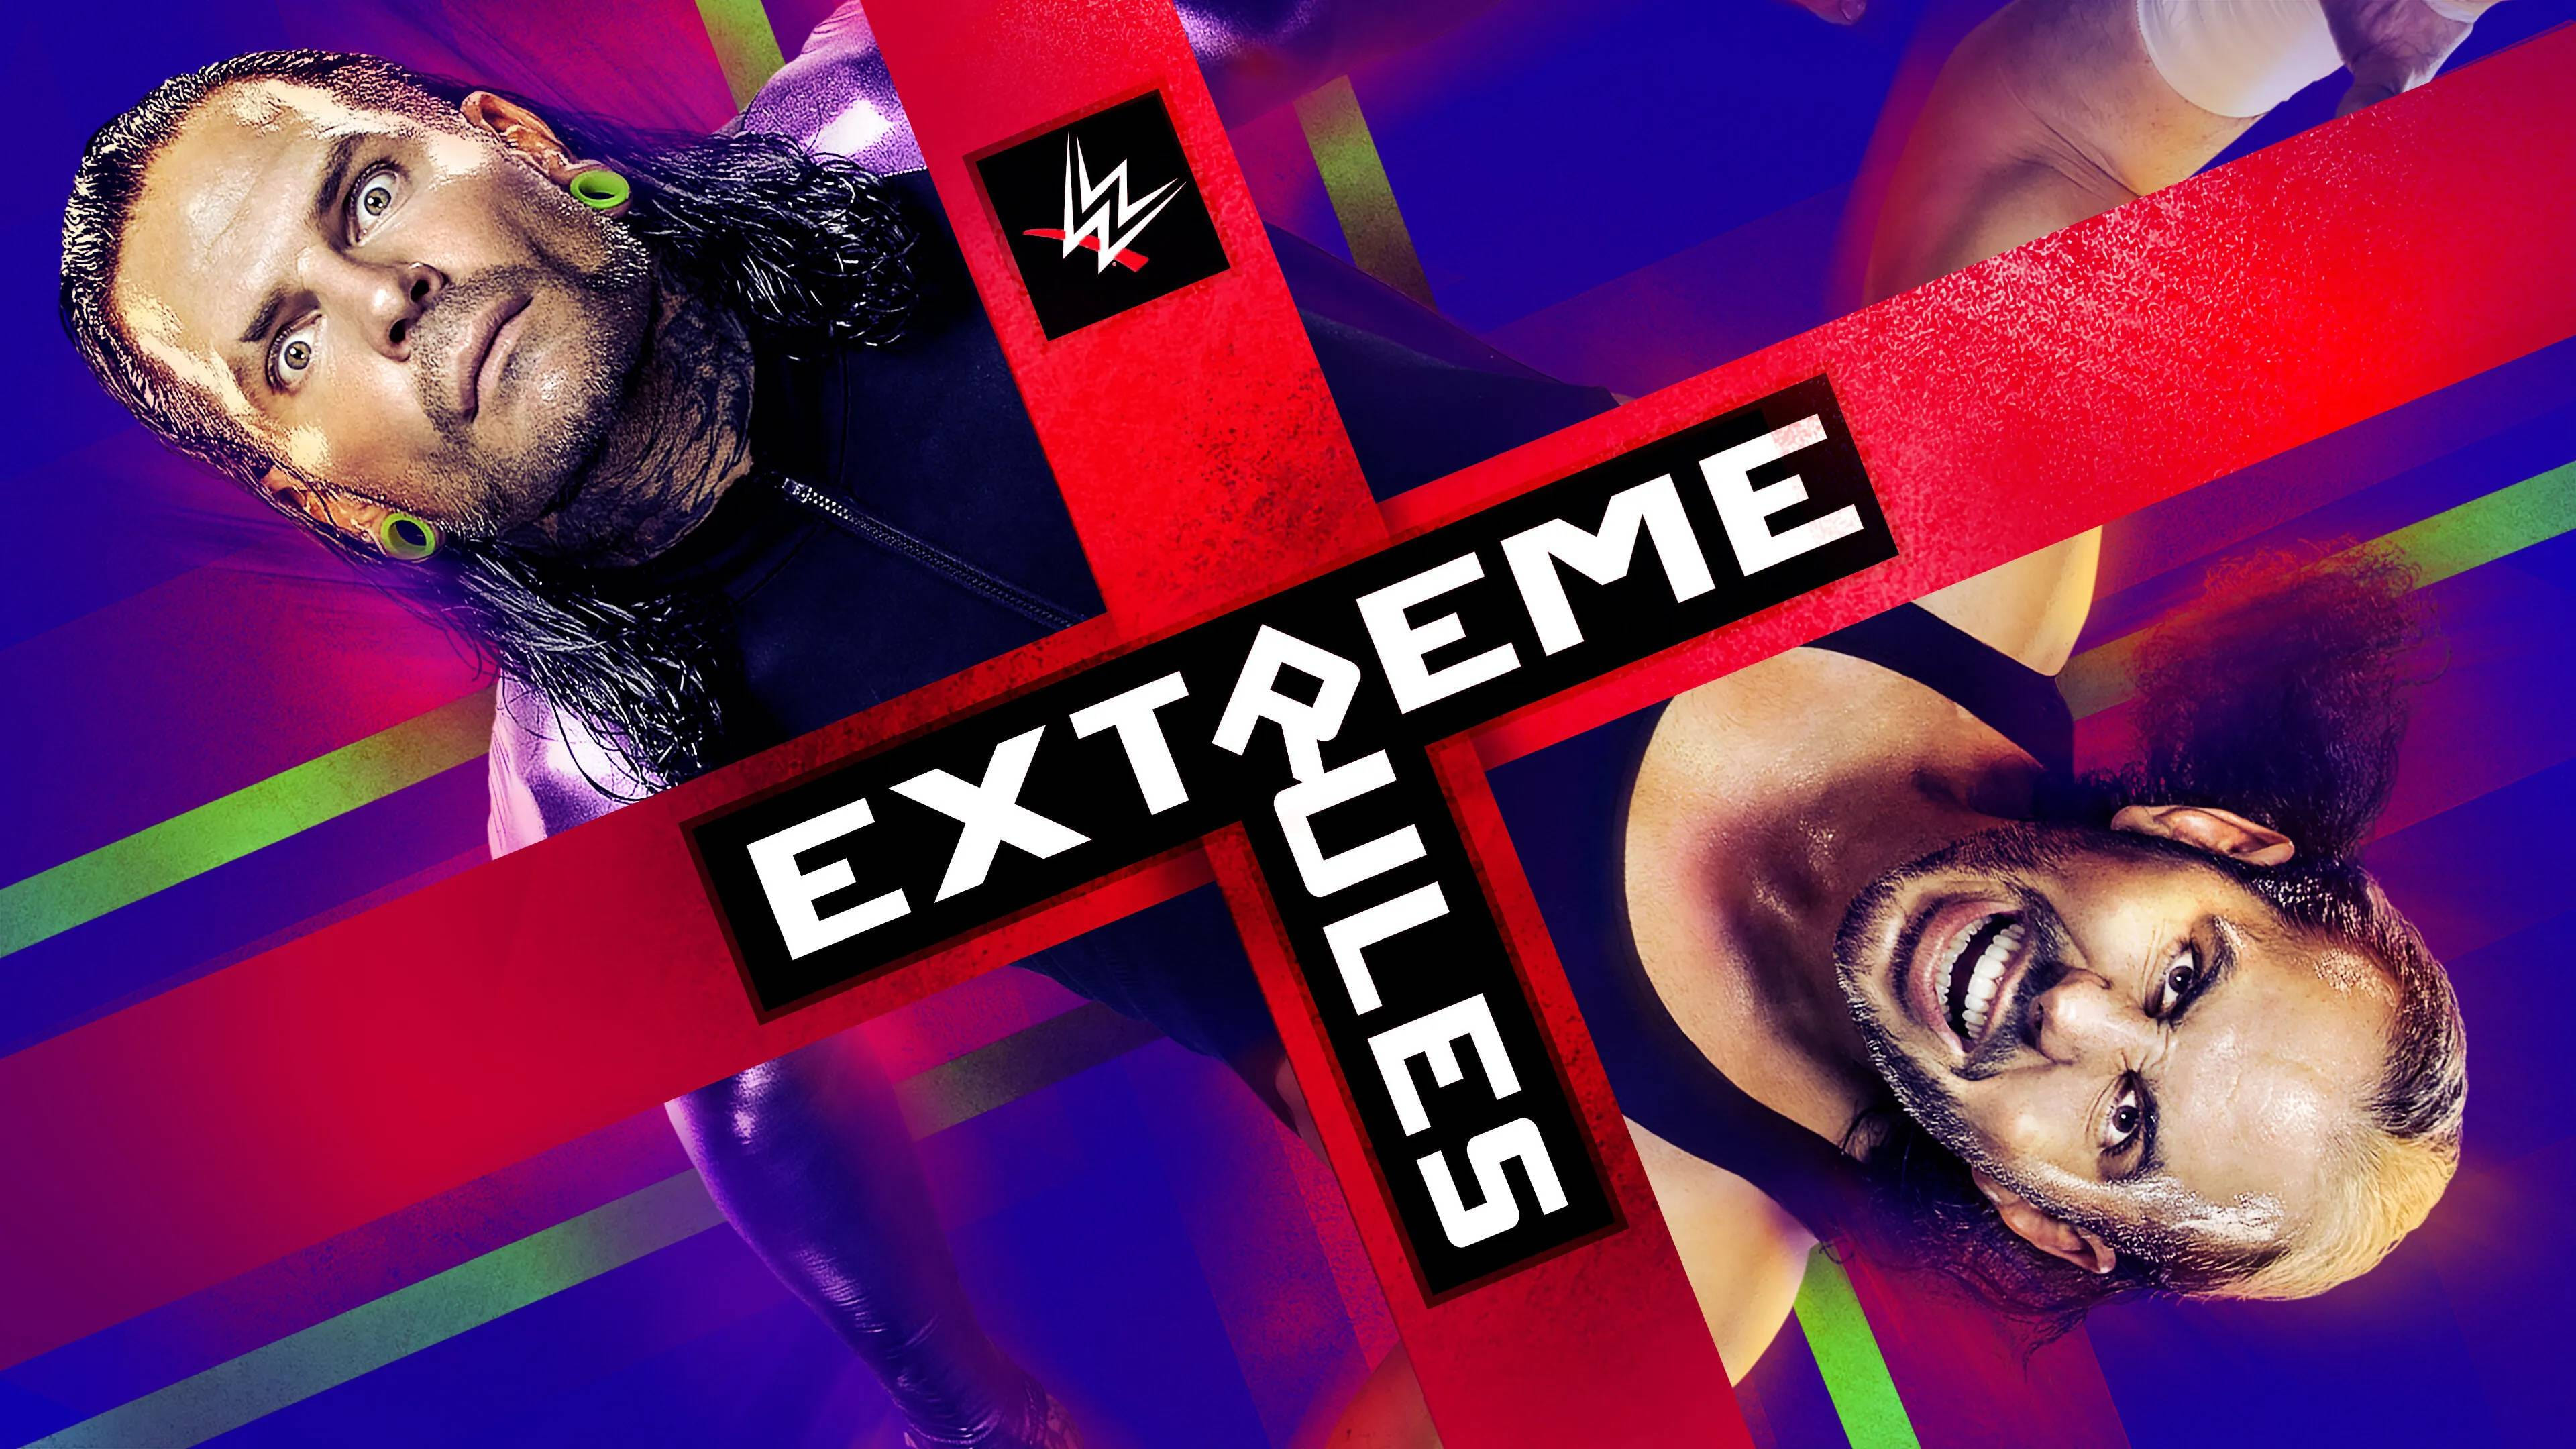 WWE Extreme Rules 2017